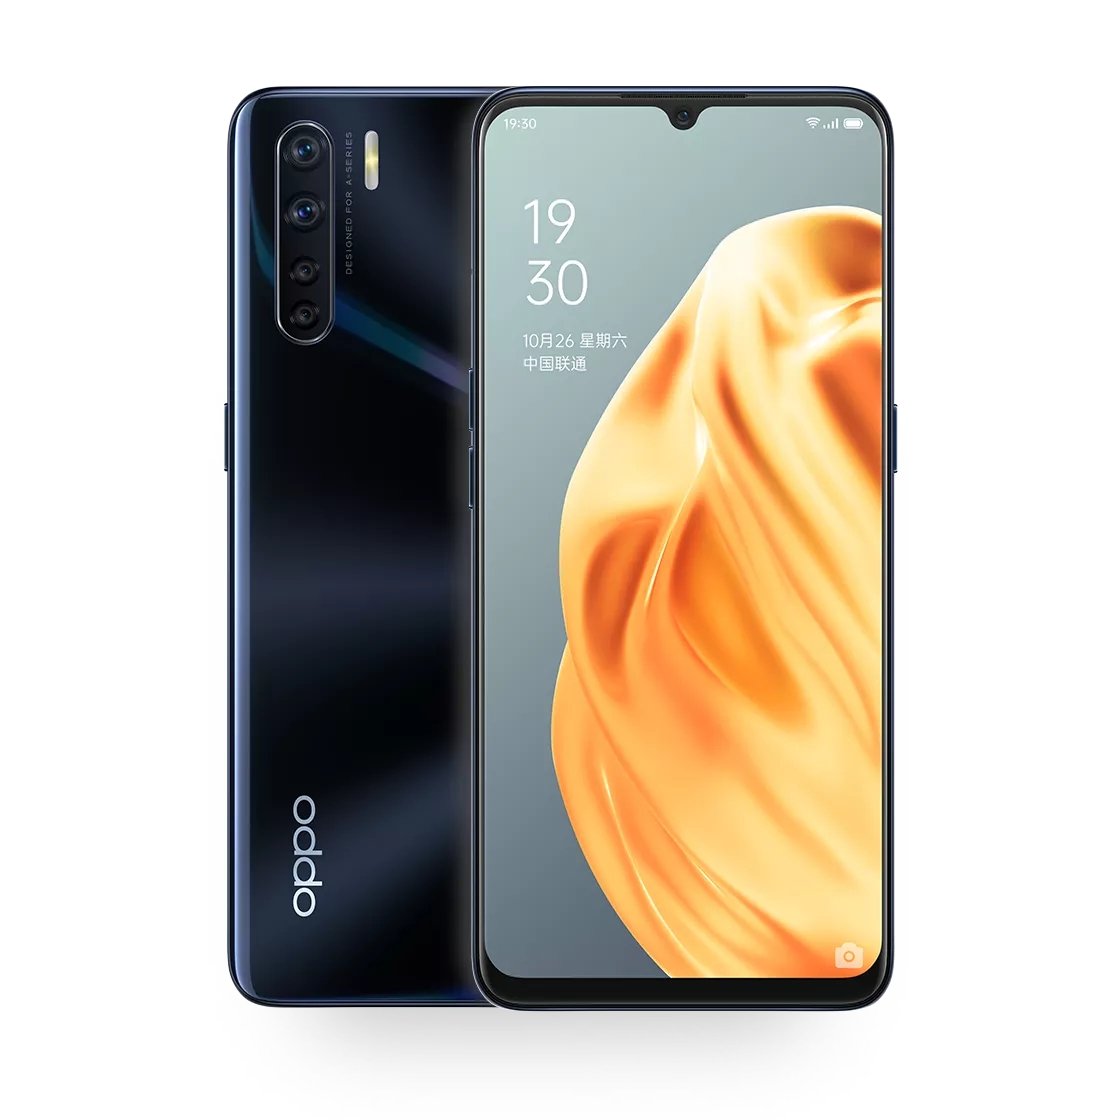 How to boot into safe mode on Oppo A91